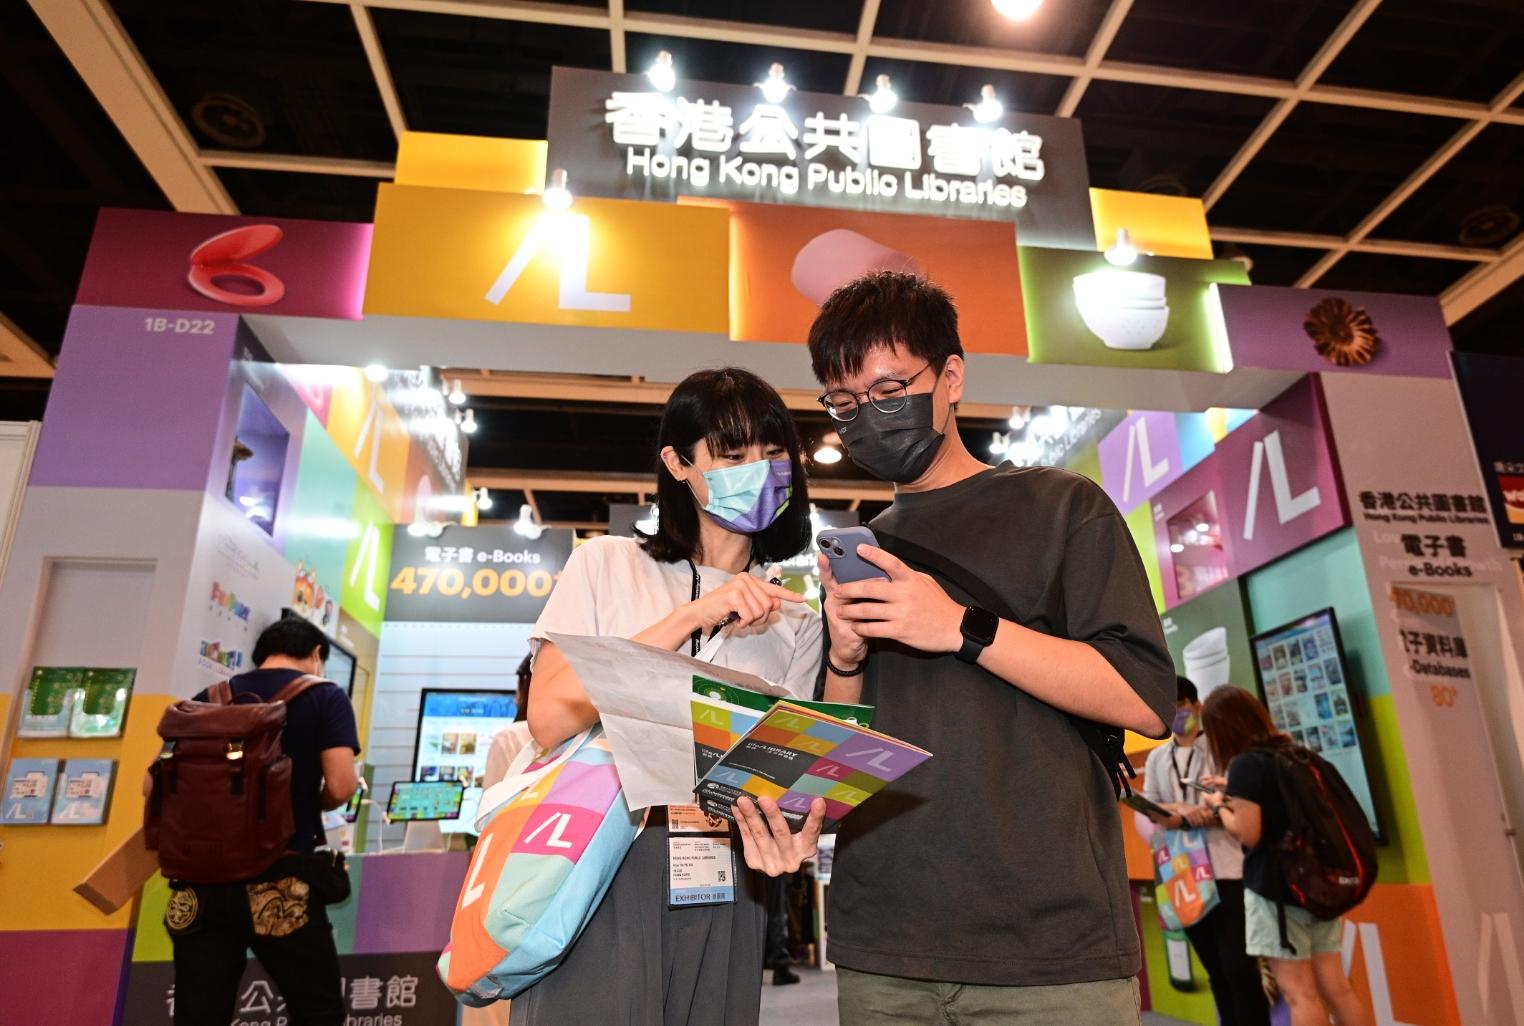 The Hong Kong Public Libraries (HKPL) has set up a booth at the Hong Kong Book Fair from today (July 20) to July 26 to introduce the rich e-resources of the HKPL. Readers can try the HKPL's e-resources on-site and experience the convenient online library services.